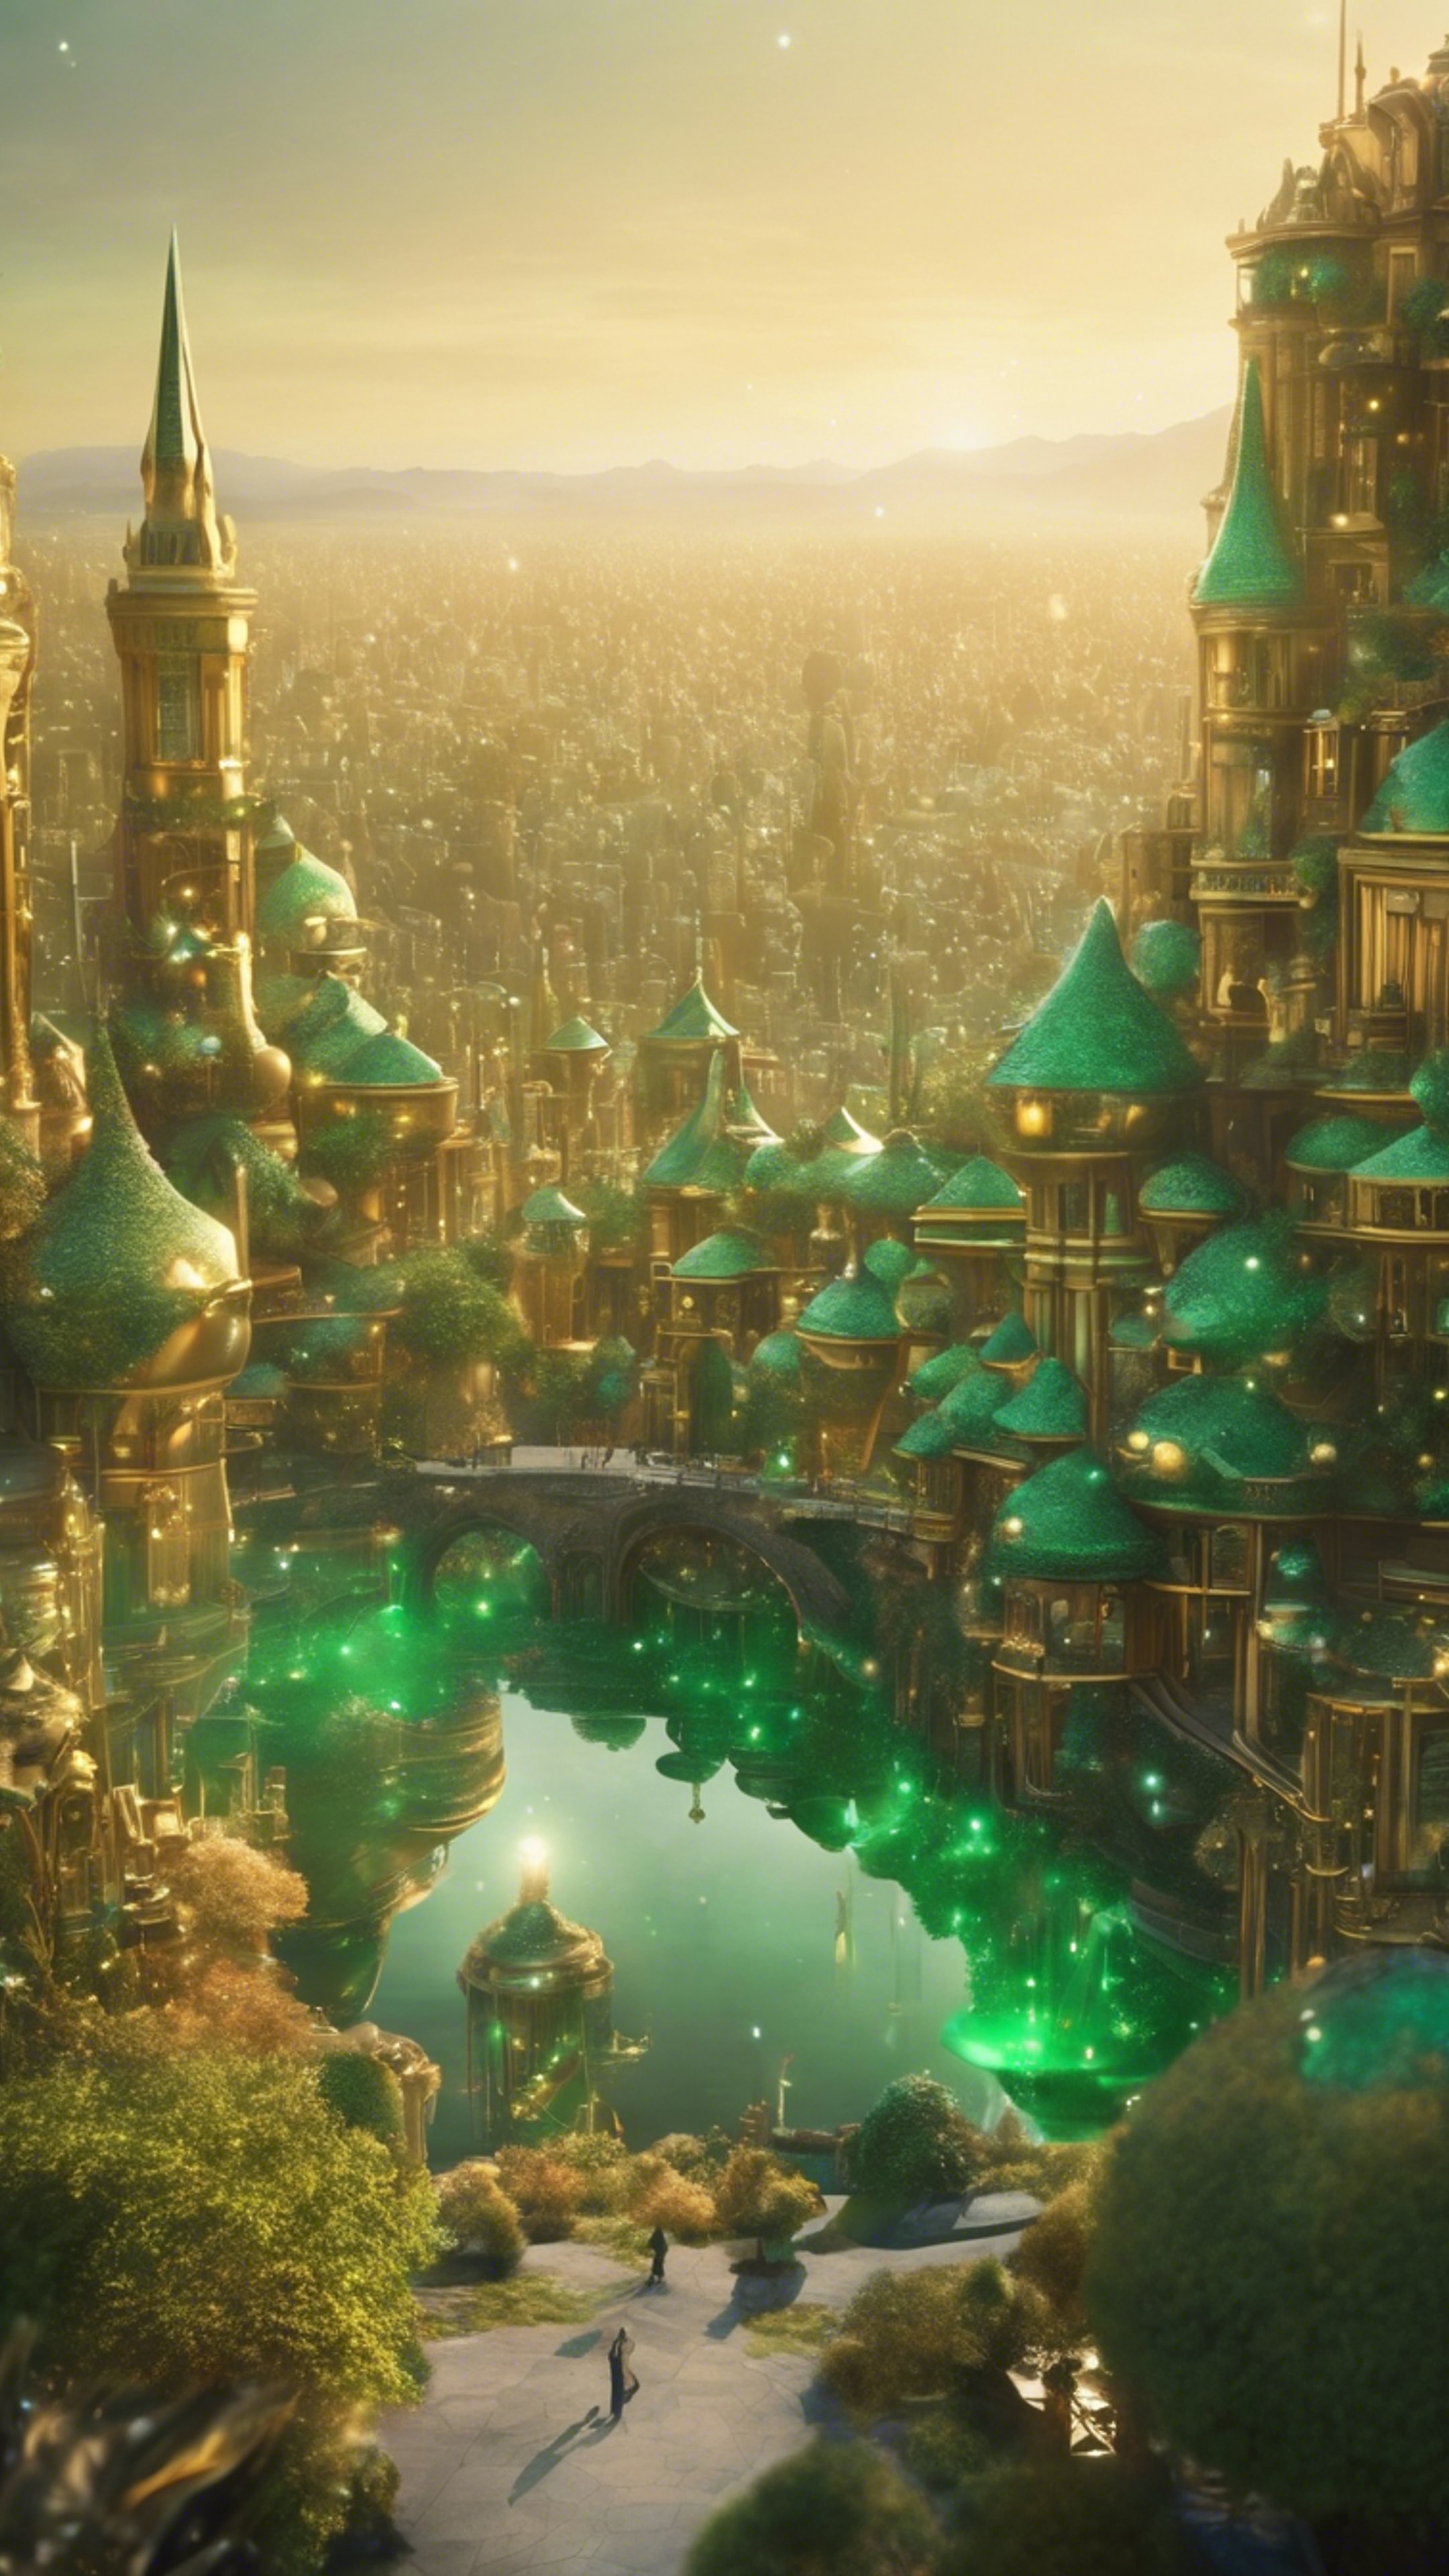 An emerald city shimmering in a golden mist within a dreamland.壁紙[436b81a71e38416794f3]